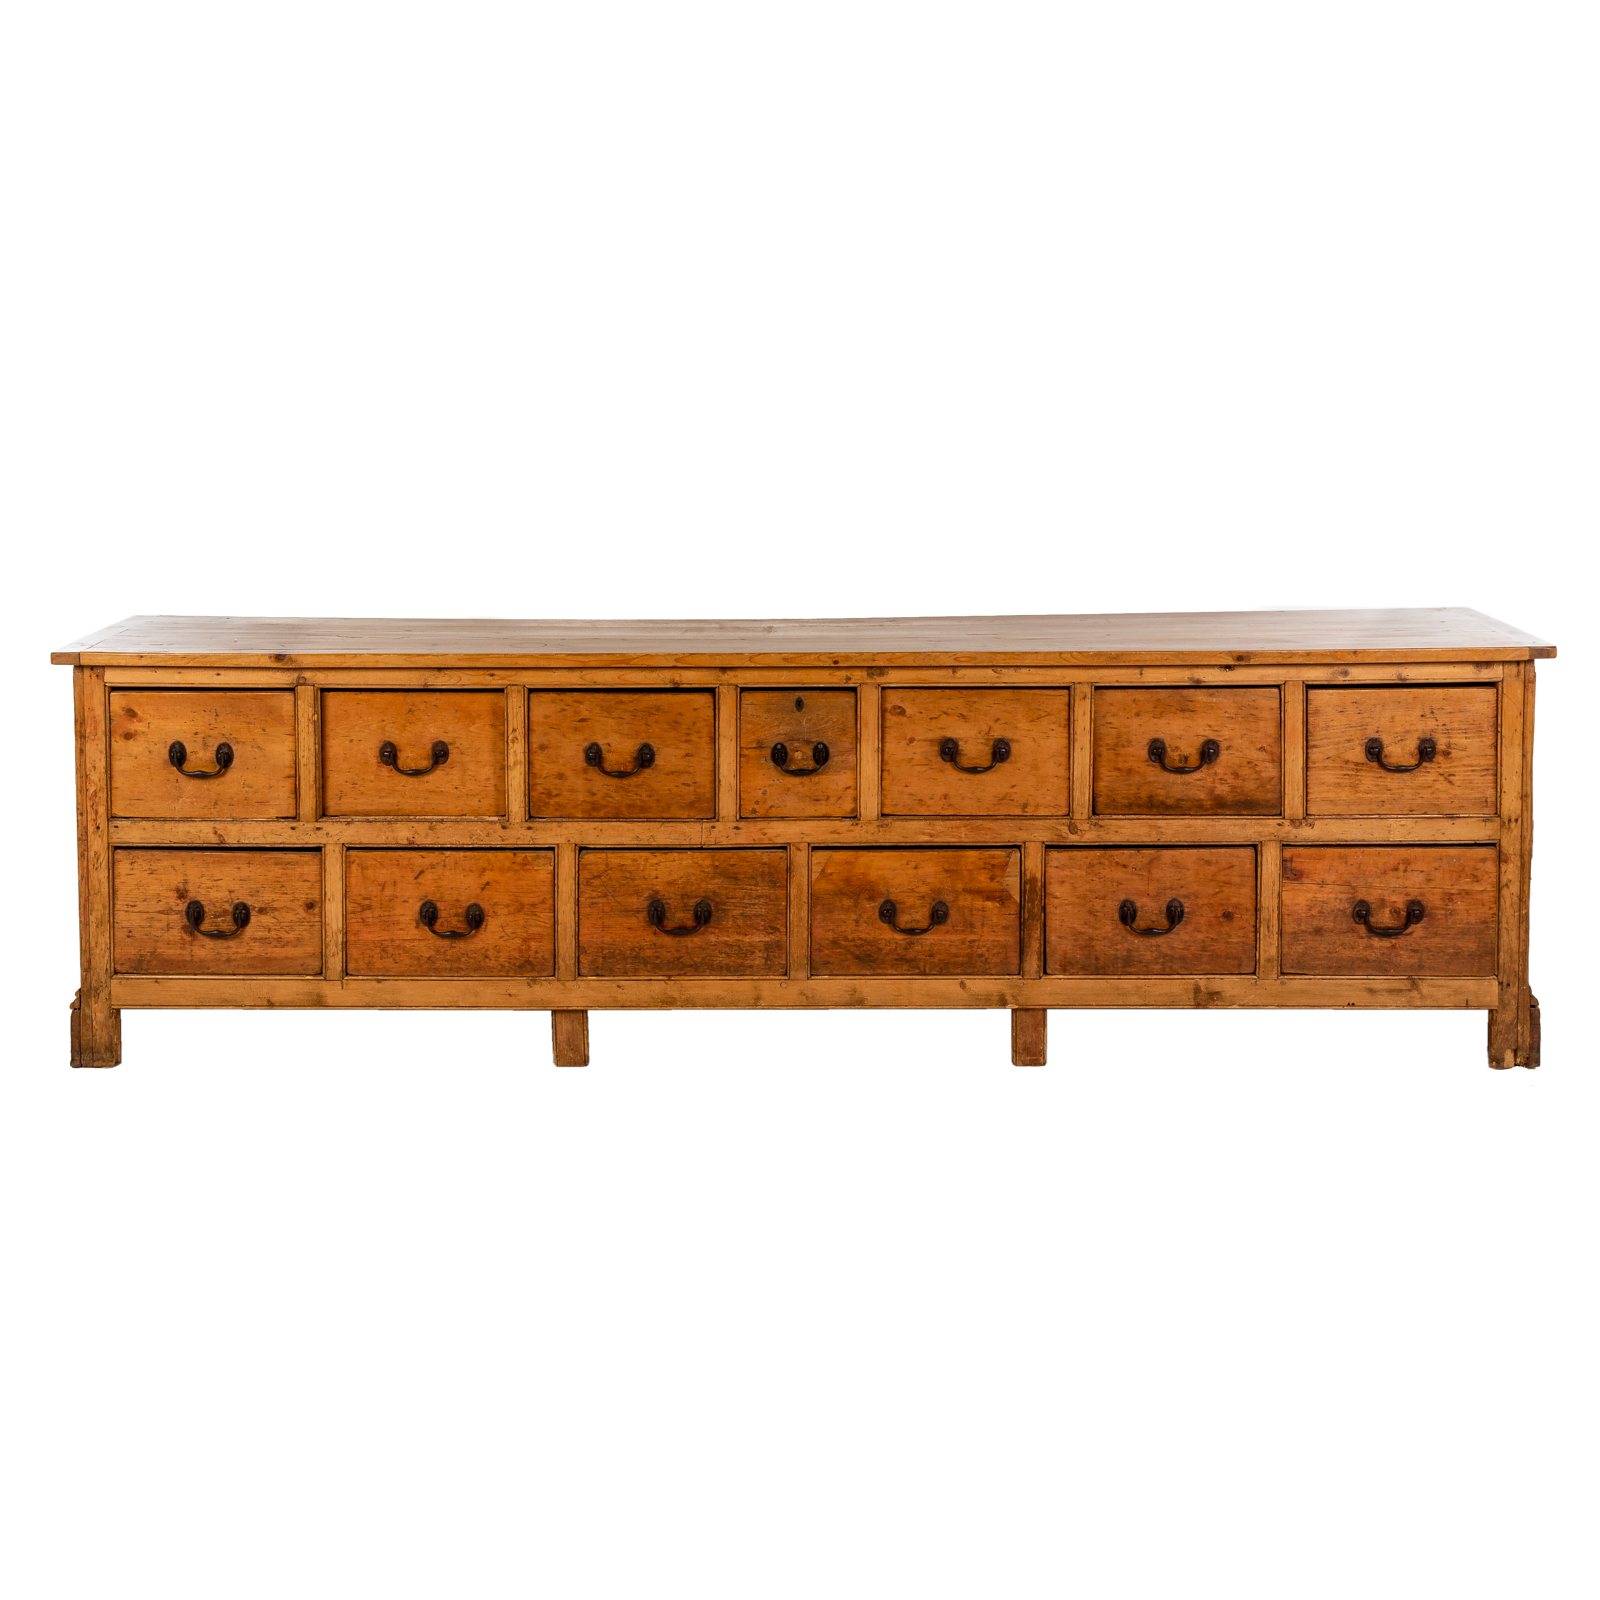 LARGE RUSTIC PINE STORE COUNTER 287599